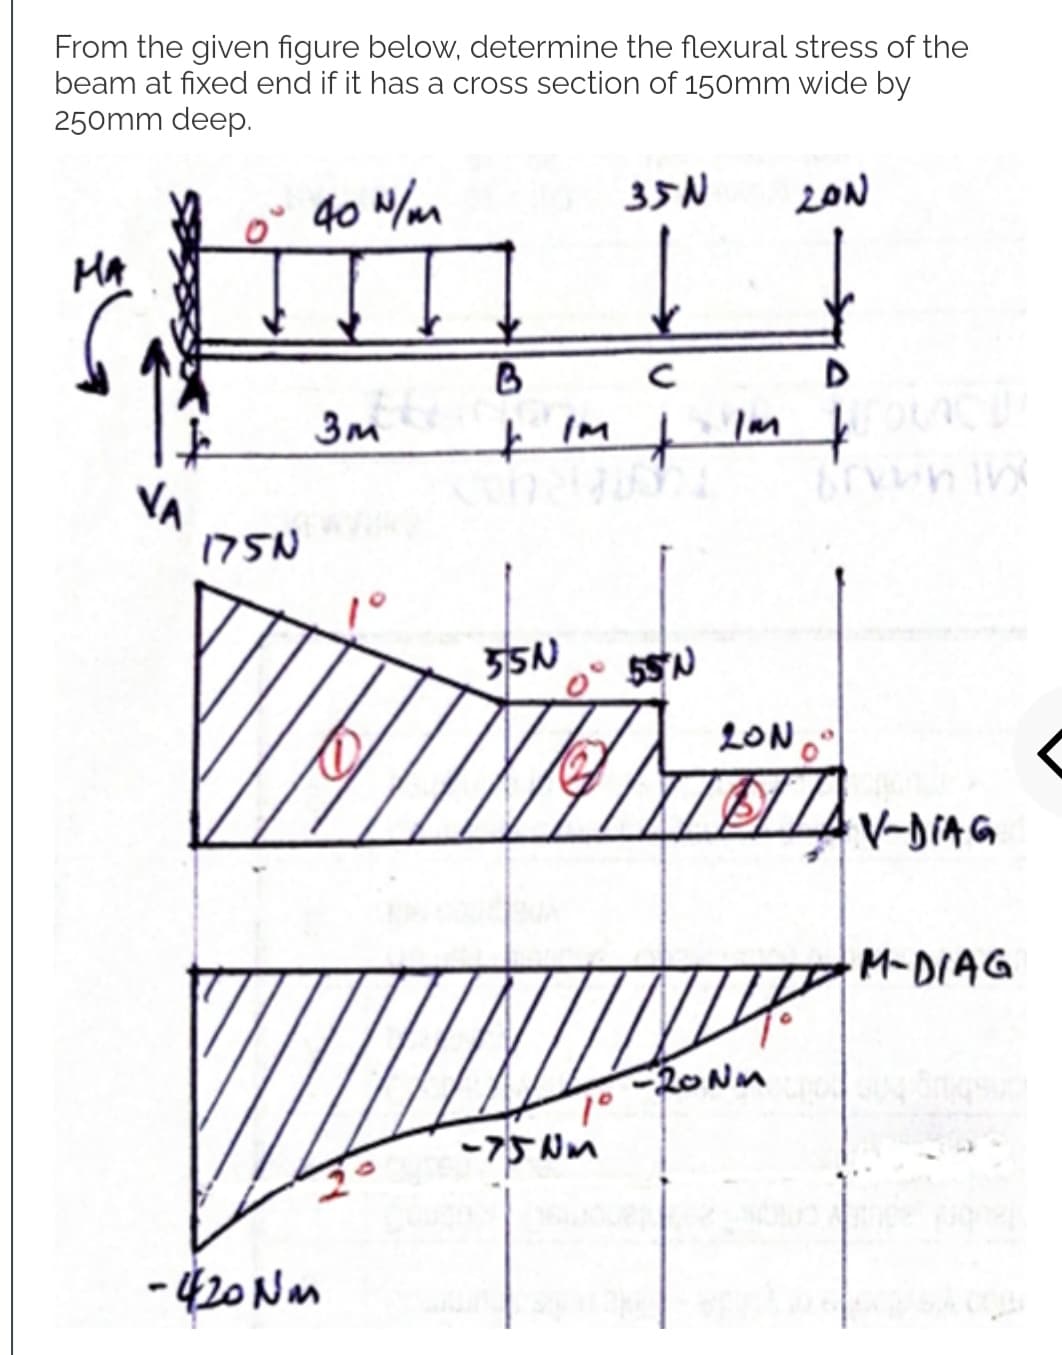 From the given figure below, determine the flexural stress of the
beam at fixed end if it has a cross section of 150mm wide by
250mm deep.
HA
VA
0
1750
40 N/m
3m
-420Nm
B
& Im
550
35 N
-75Nm
с
+
0° 55'N
20N
20N 0°
DAV-DIAG
-20Nm
M-DIAG